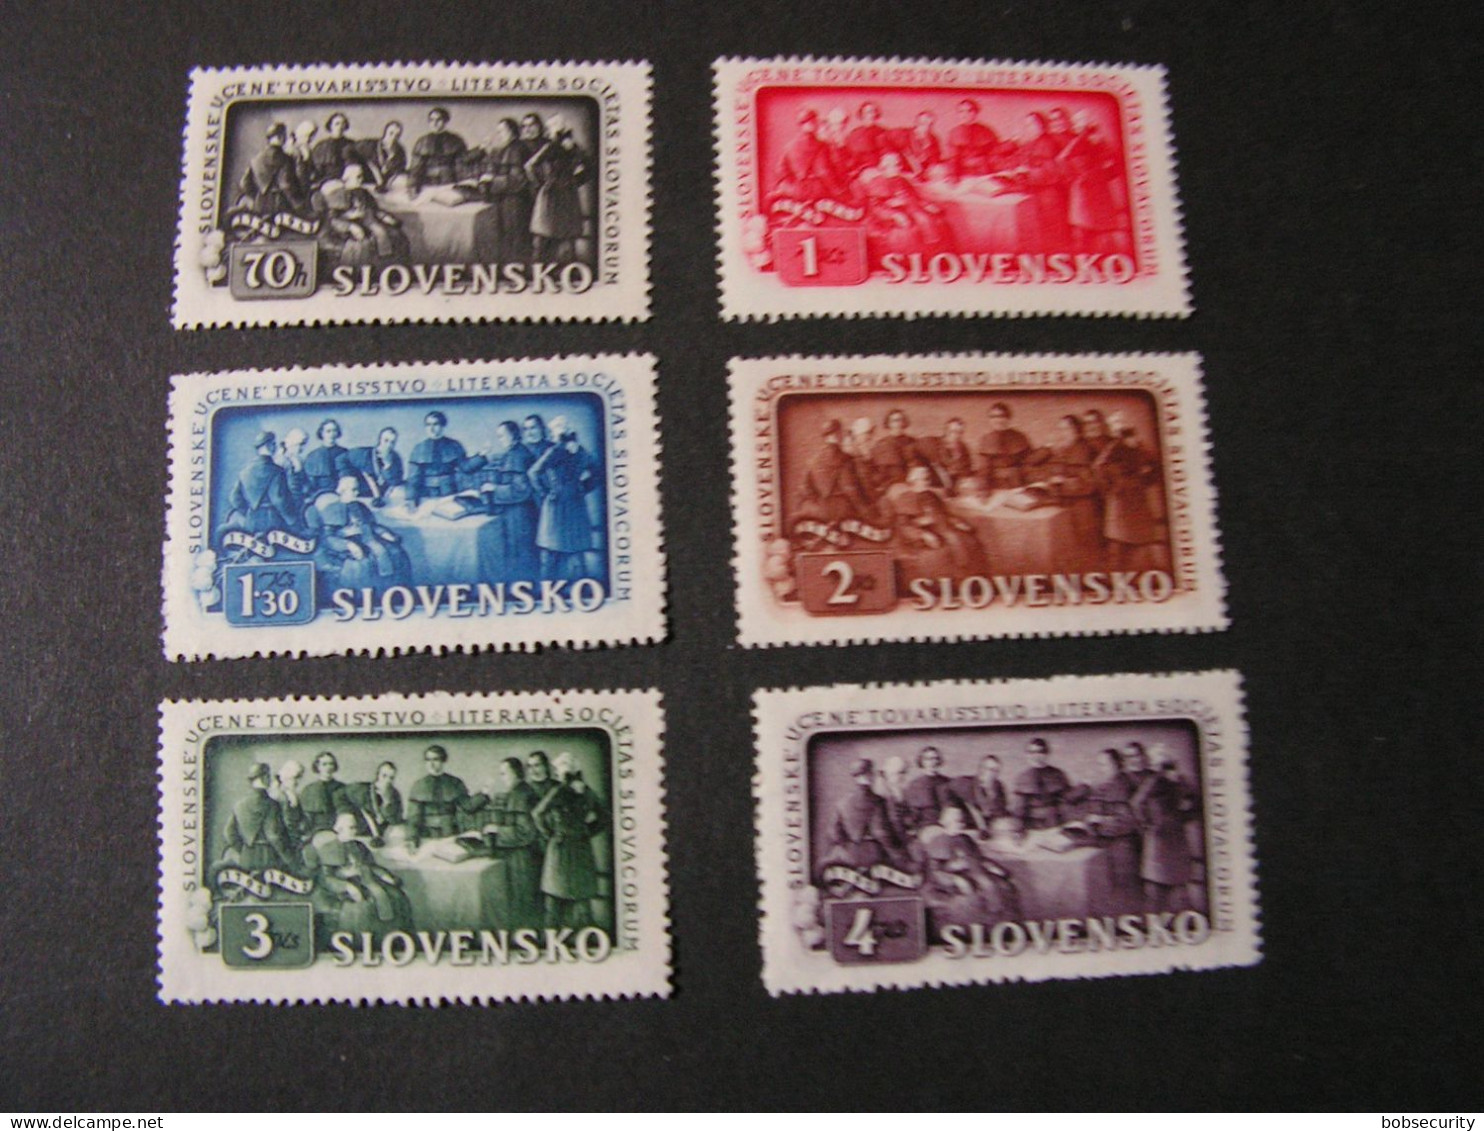 SK 1943  Lot   ** MNH  , One Stamp Not Perffect - Nuevos